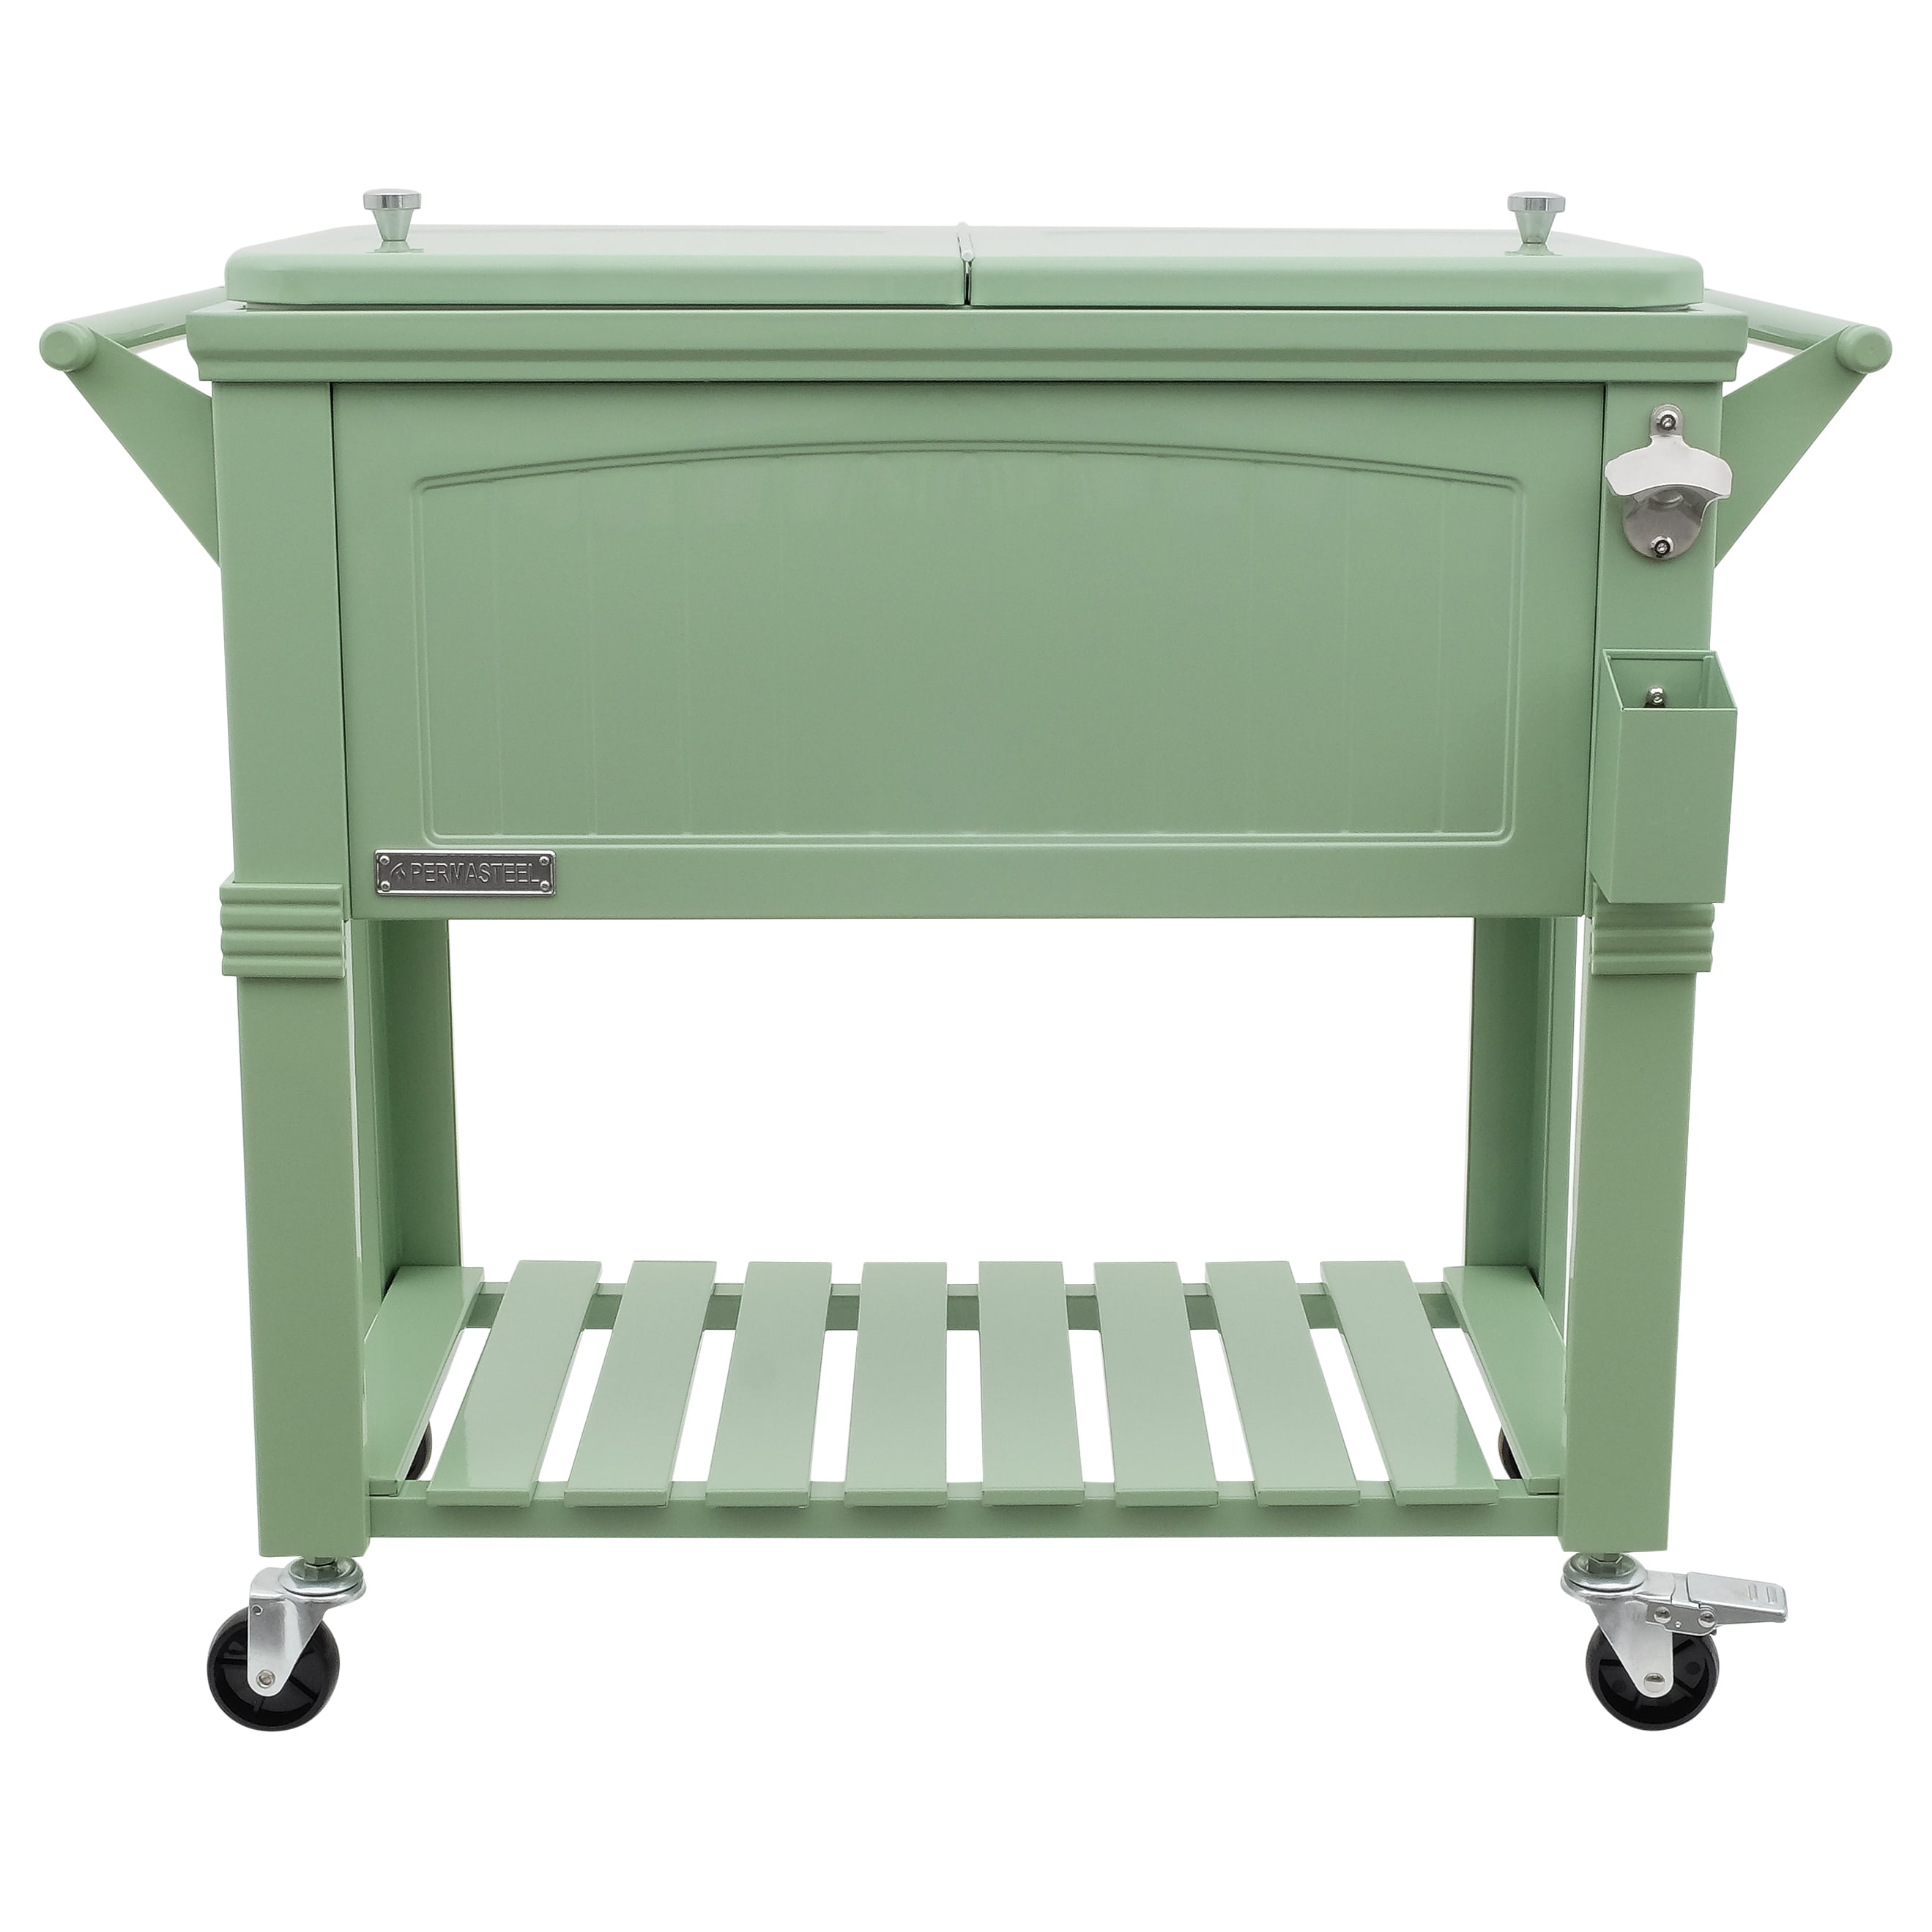 Permasteel Ps 203f1 Teal Portable Rolling Patio Cooler 80 Qt Com - Permasteel 80 Qt Rolling Patio Cooler Cart In White